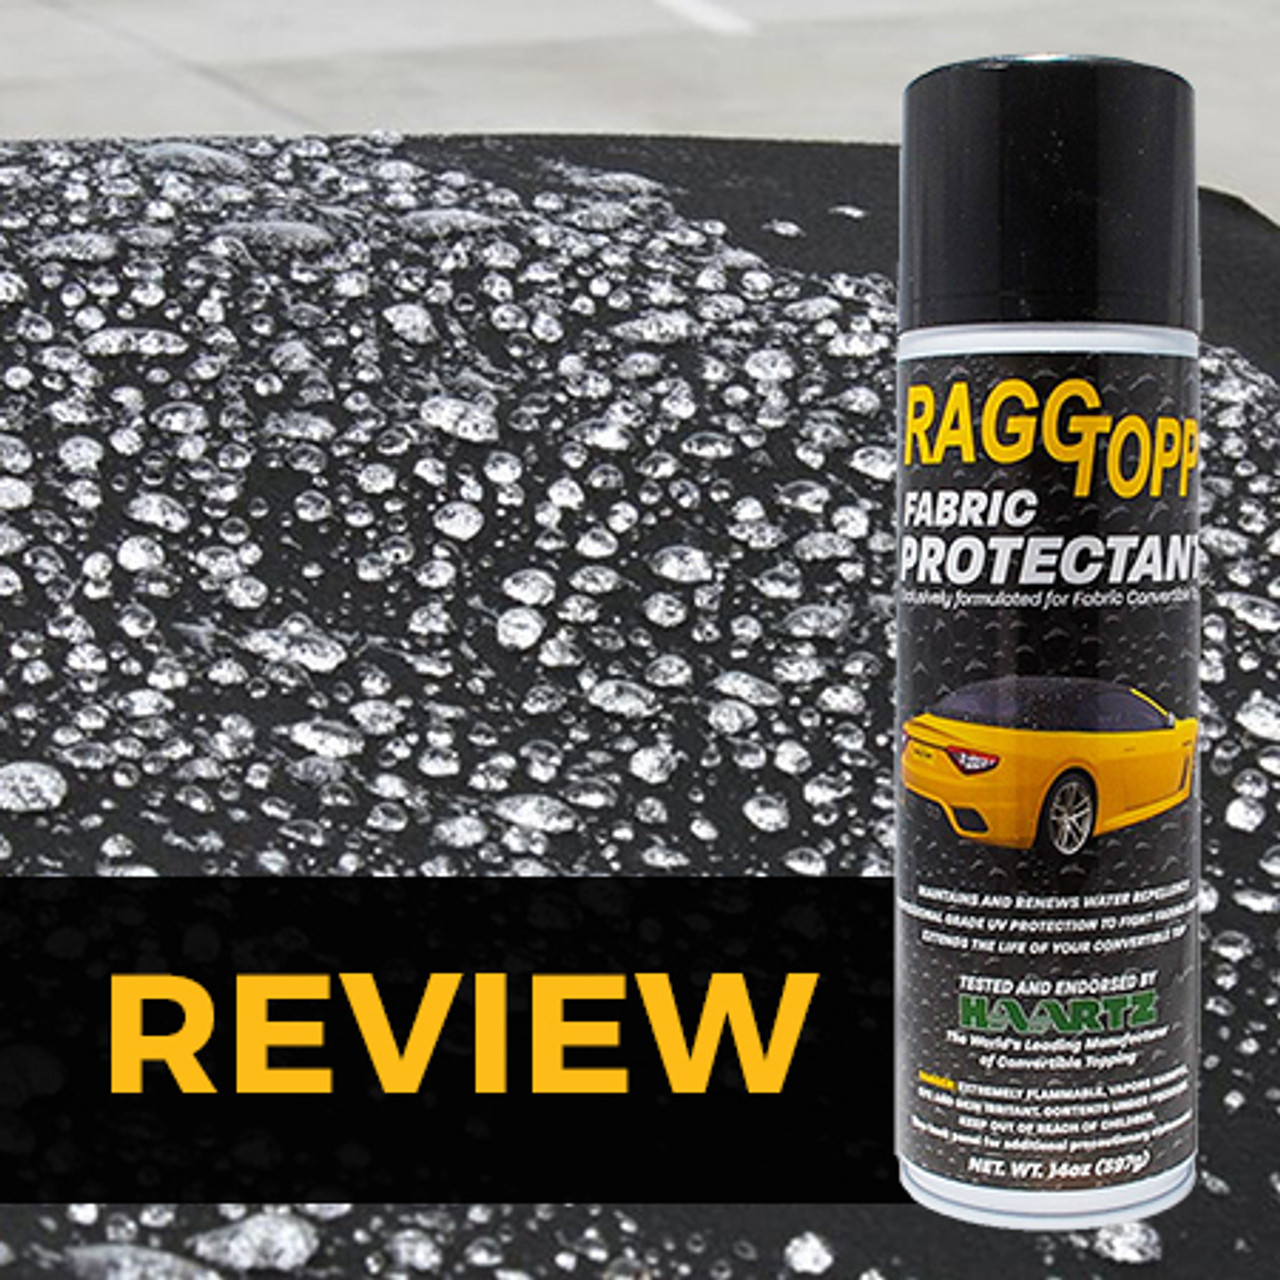 How to apply RaggTopp Cleaner and Protectant, Review and